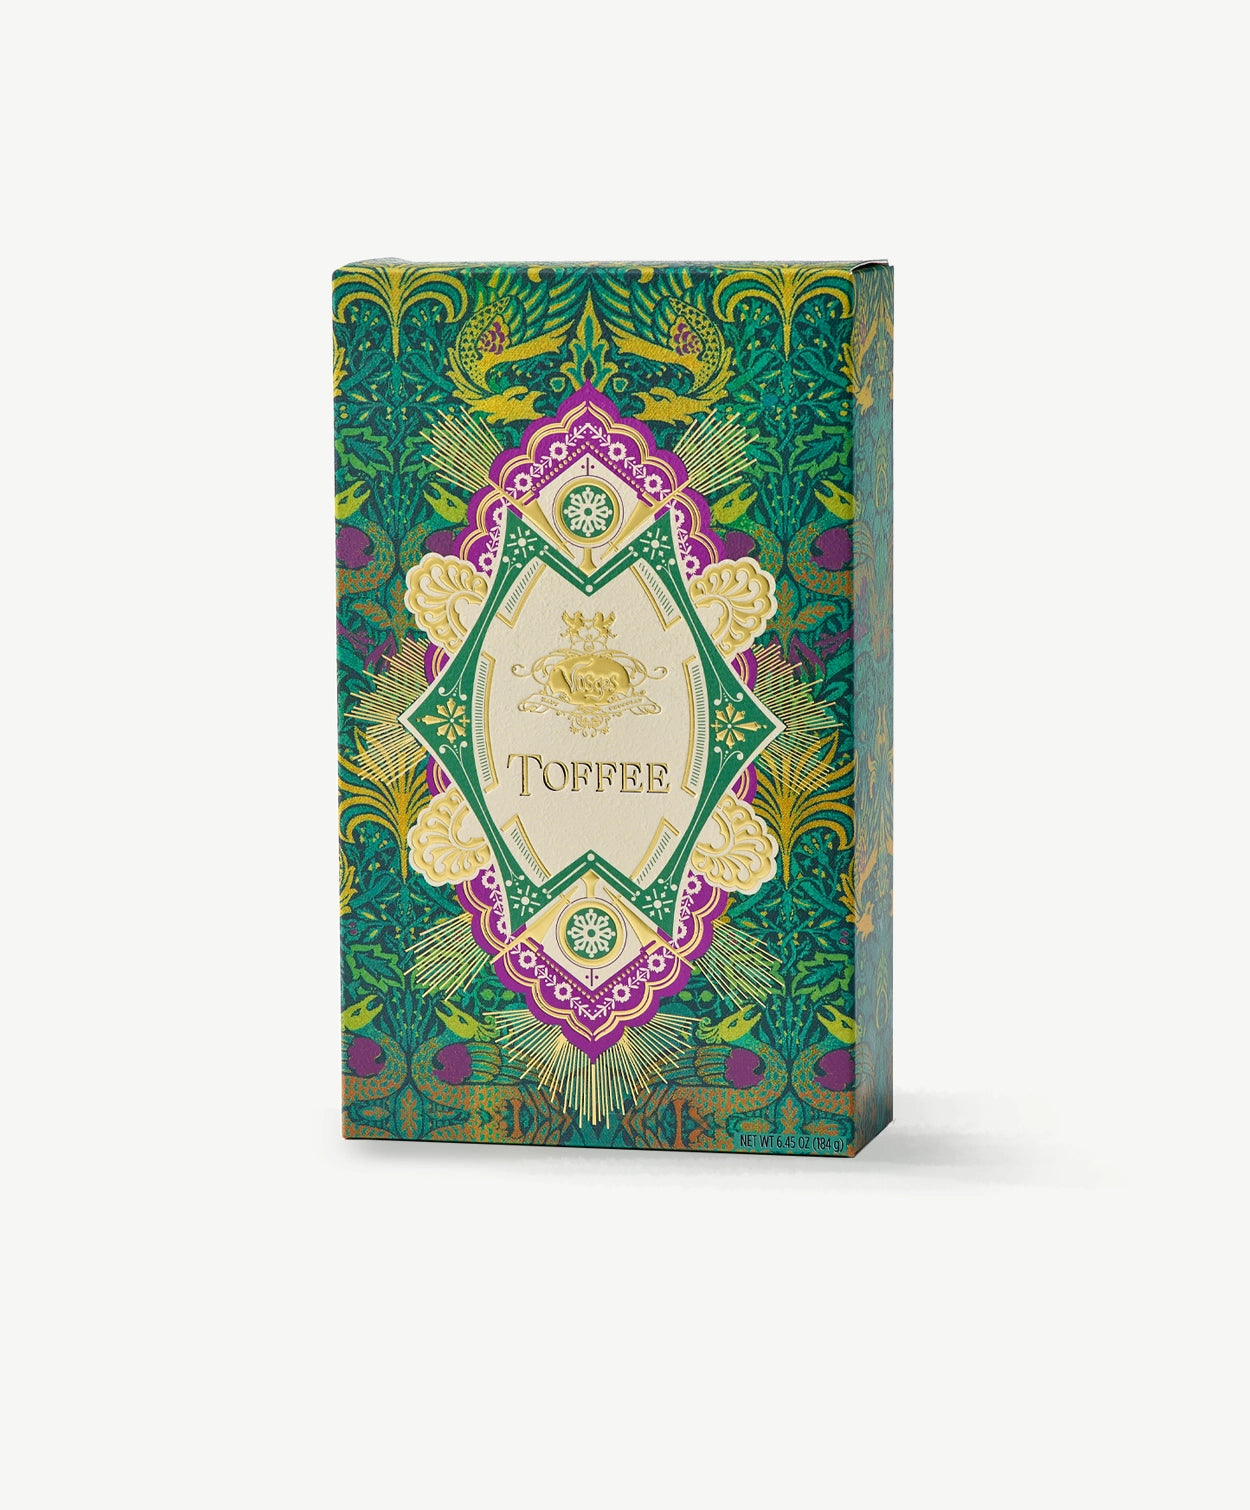 A green and purple Vosges toffee box adorned in gold foil stands upright on a light grey background.